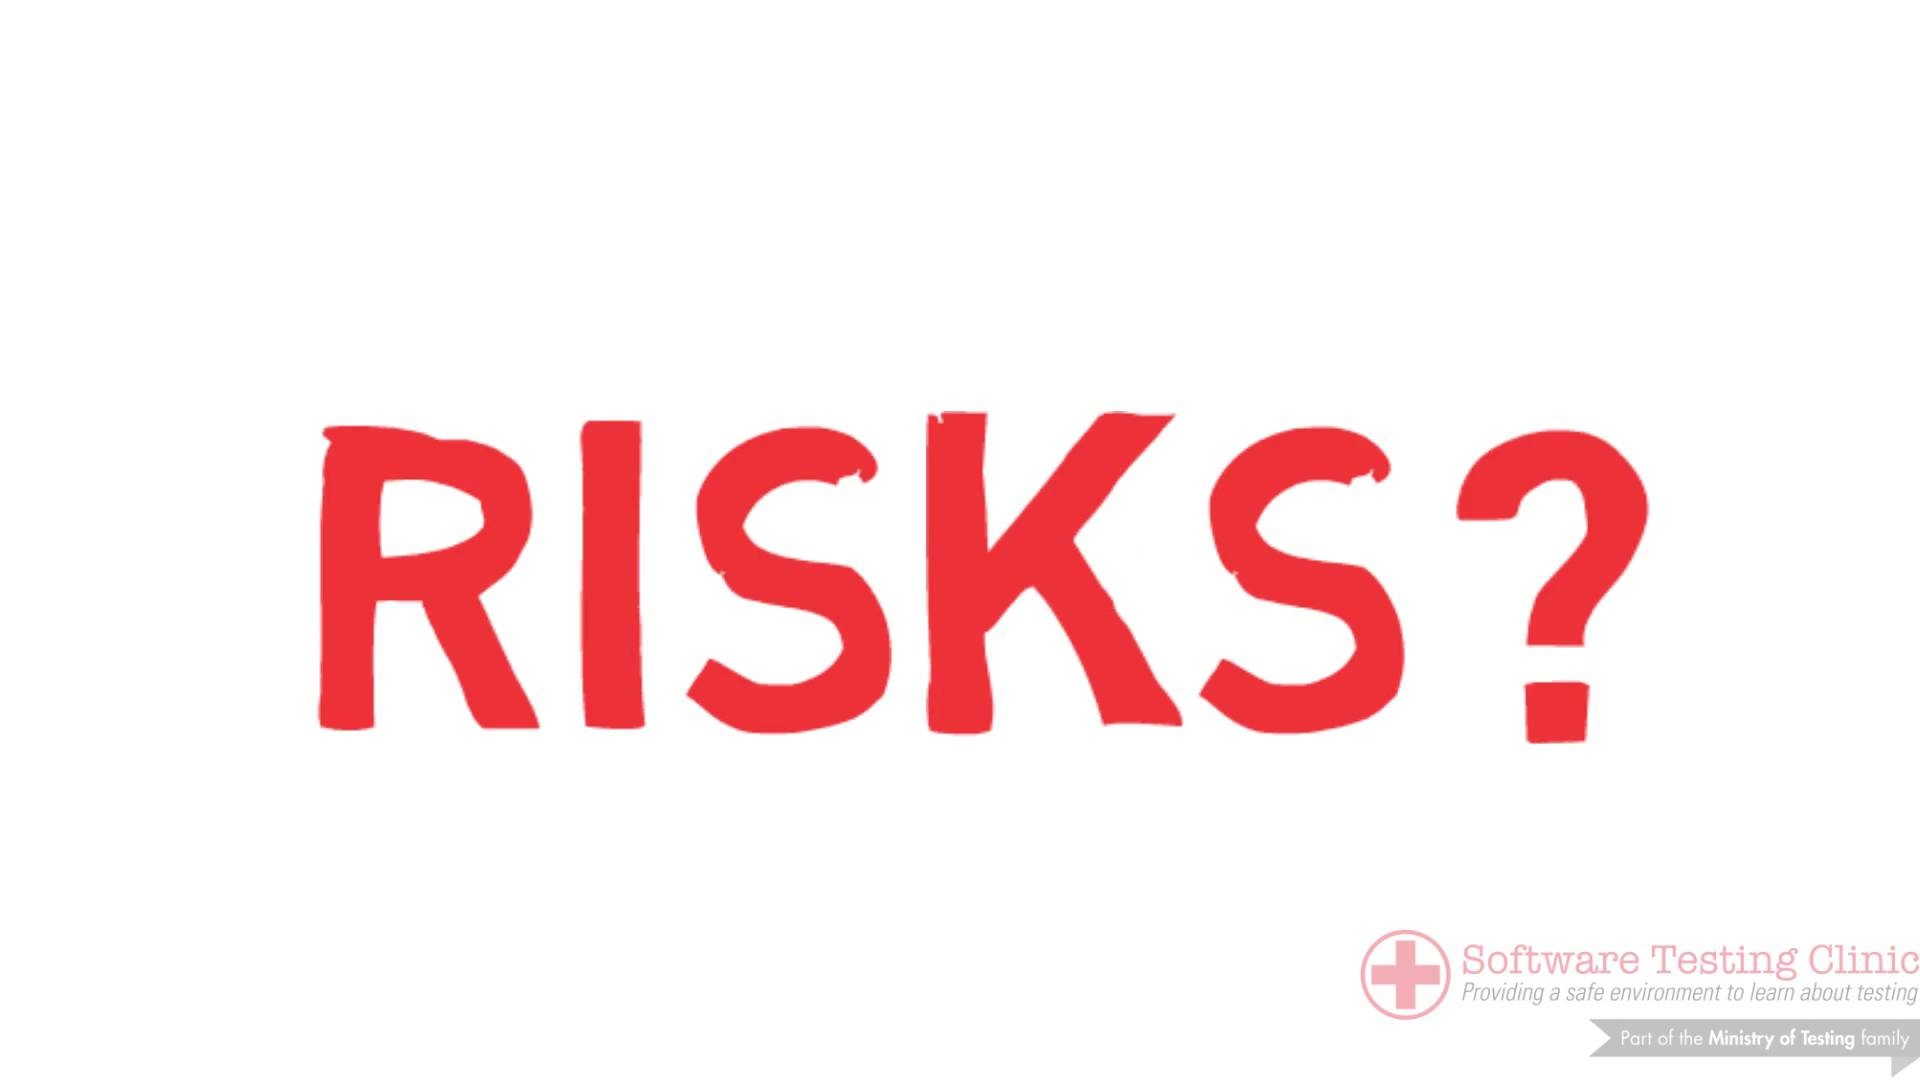 What Are Risks?